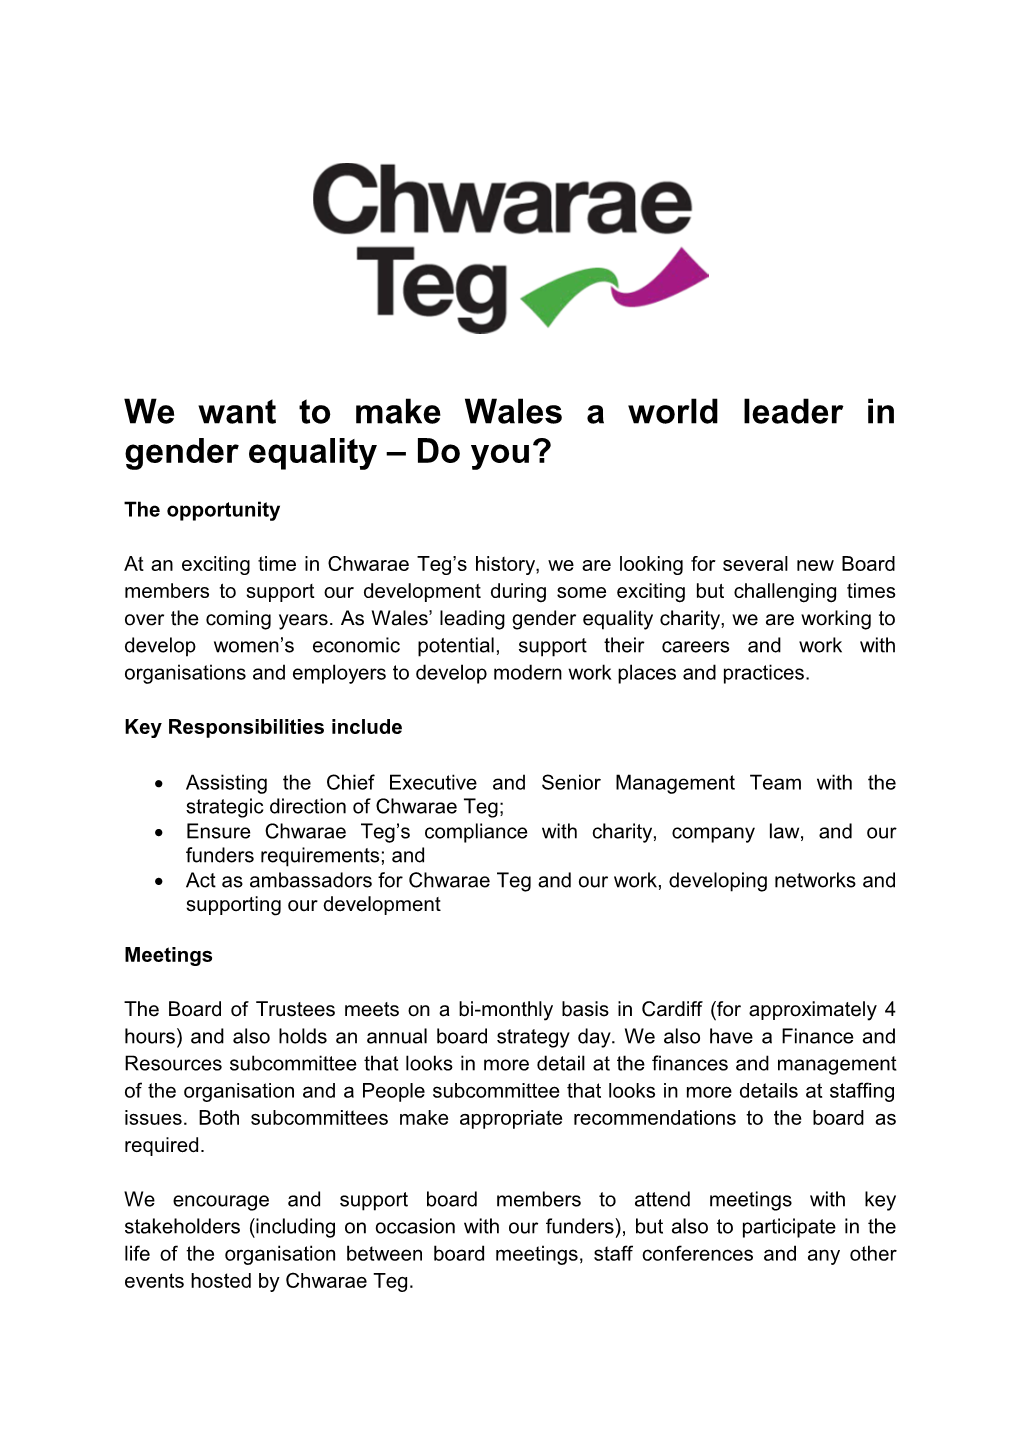 We Want to Make Wales a World Leader in Gender Equality Do You?